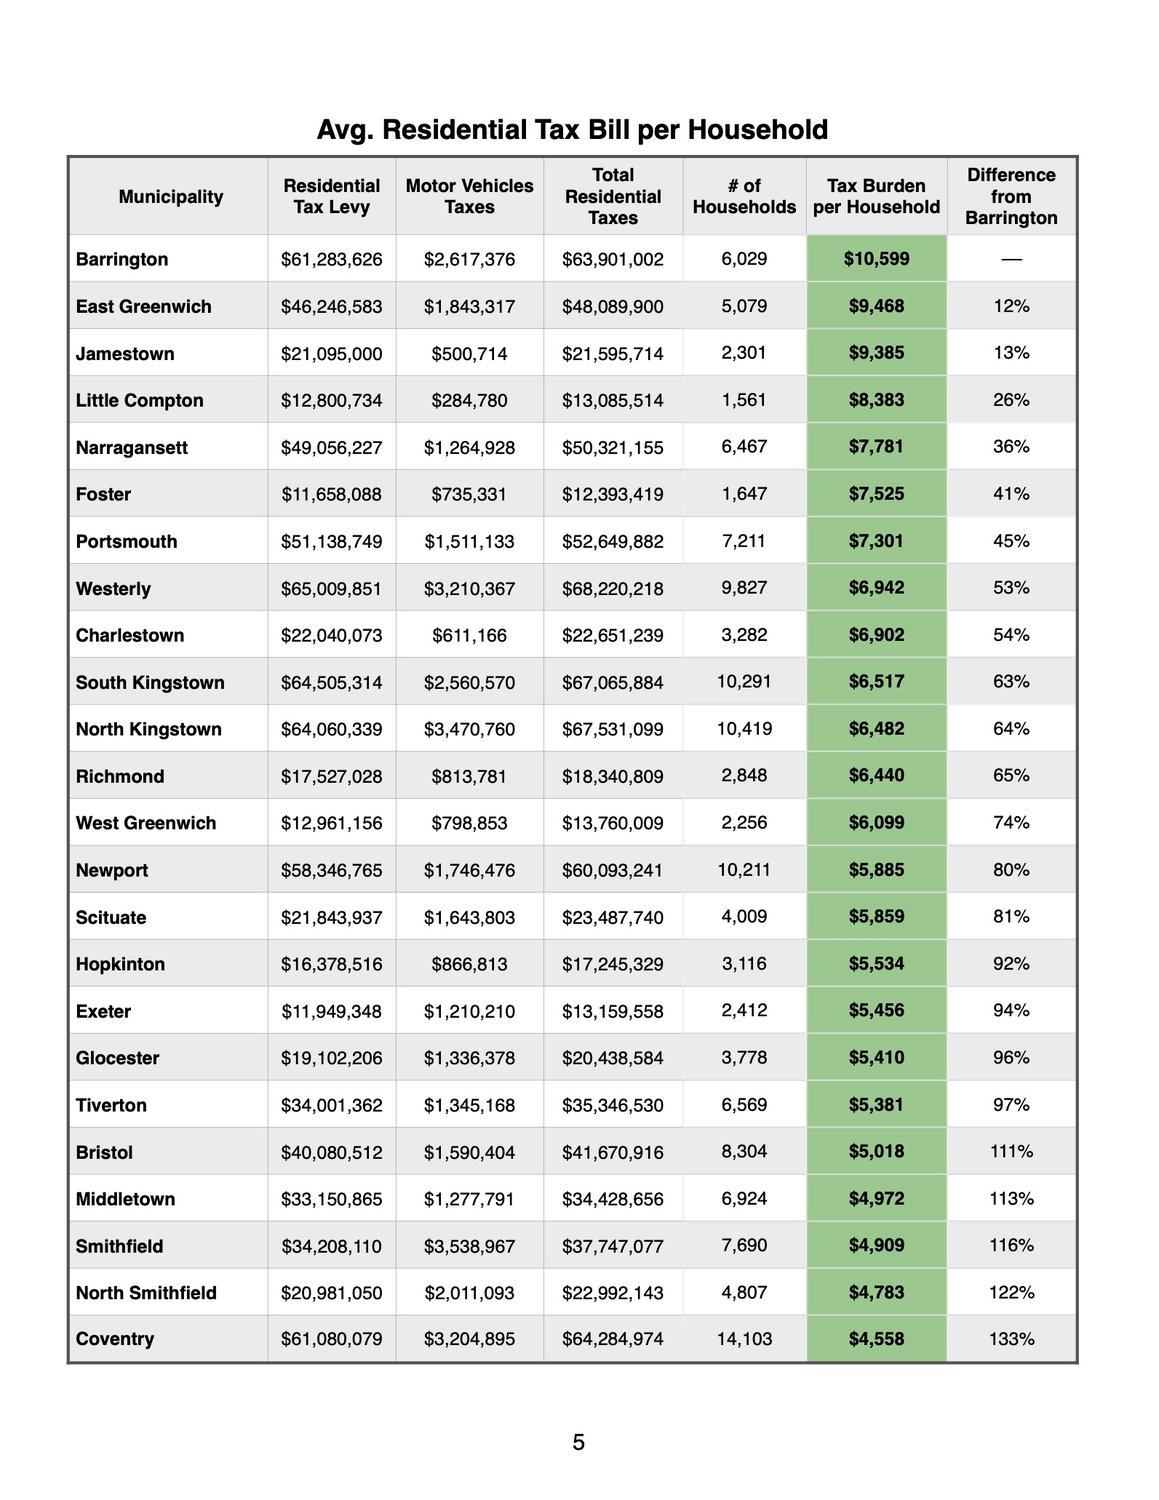 In this Barrington Times analysis based on Fiscal Year 2022 data from the R.I. Division of Taxation, Barrington has the highest average household tax burden in the state. The analysis includes residential property taxes and motor vehicle taxes, but does not include Sewer Use and Sewer Improvement fees, which account for another $4.1 million in annual “taxes” not shown here. Barrington lands at the top of this Top-25 list because it has one of the smallest commercial tax bases in the state. Note: In much of this analysis, New Shoreham (Block Island) was excluded as an outlier.